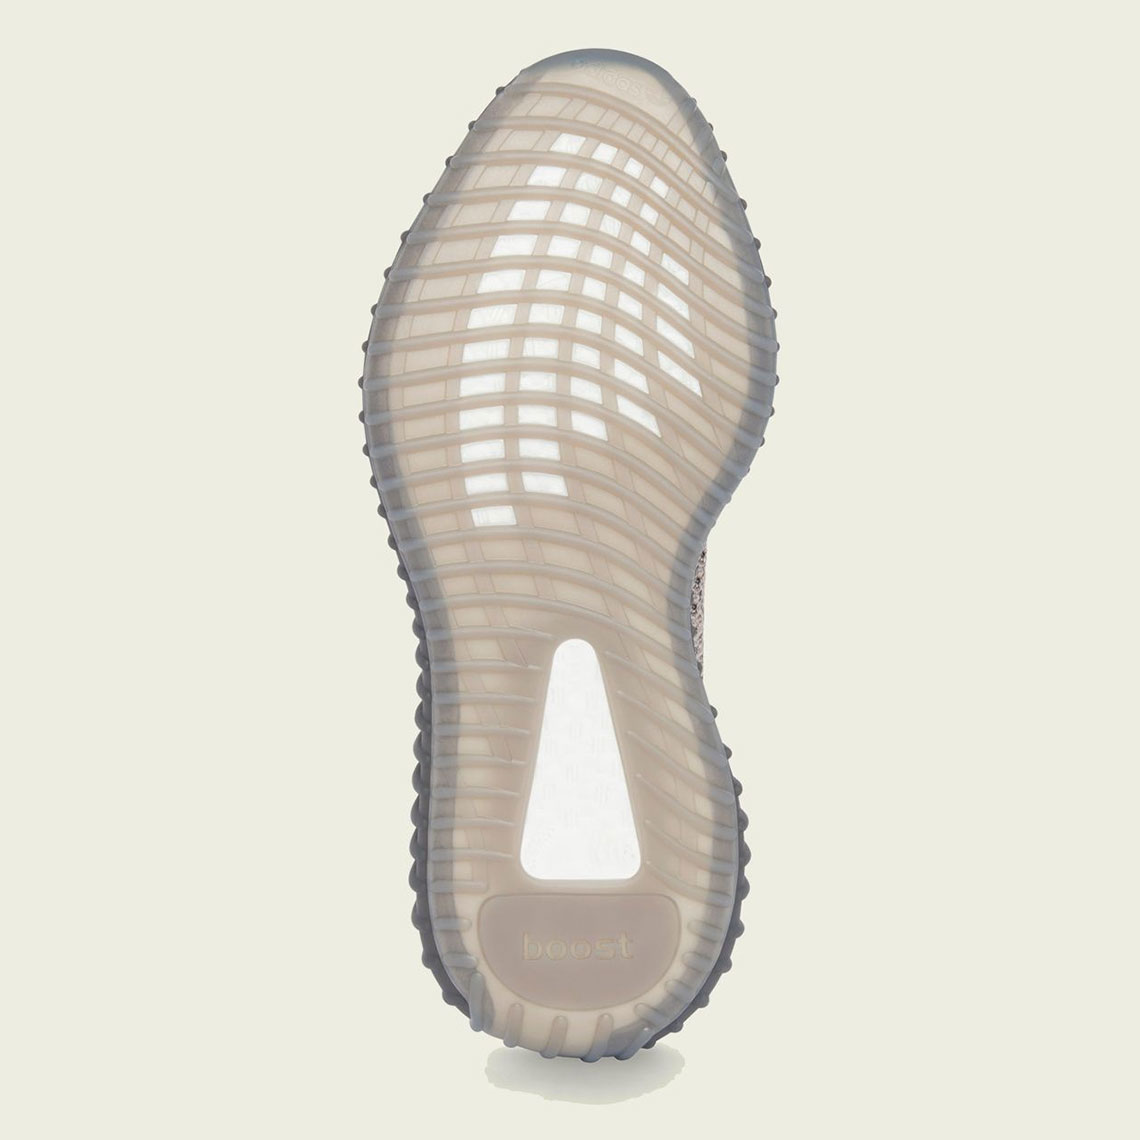 Adidas Yeezy Boost 350 V2 Ash Stone Gw0089 Official Images 3